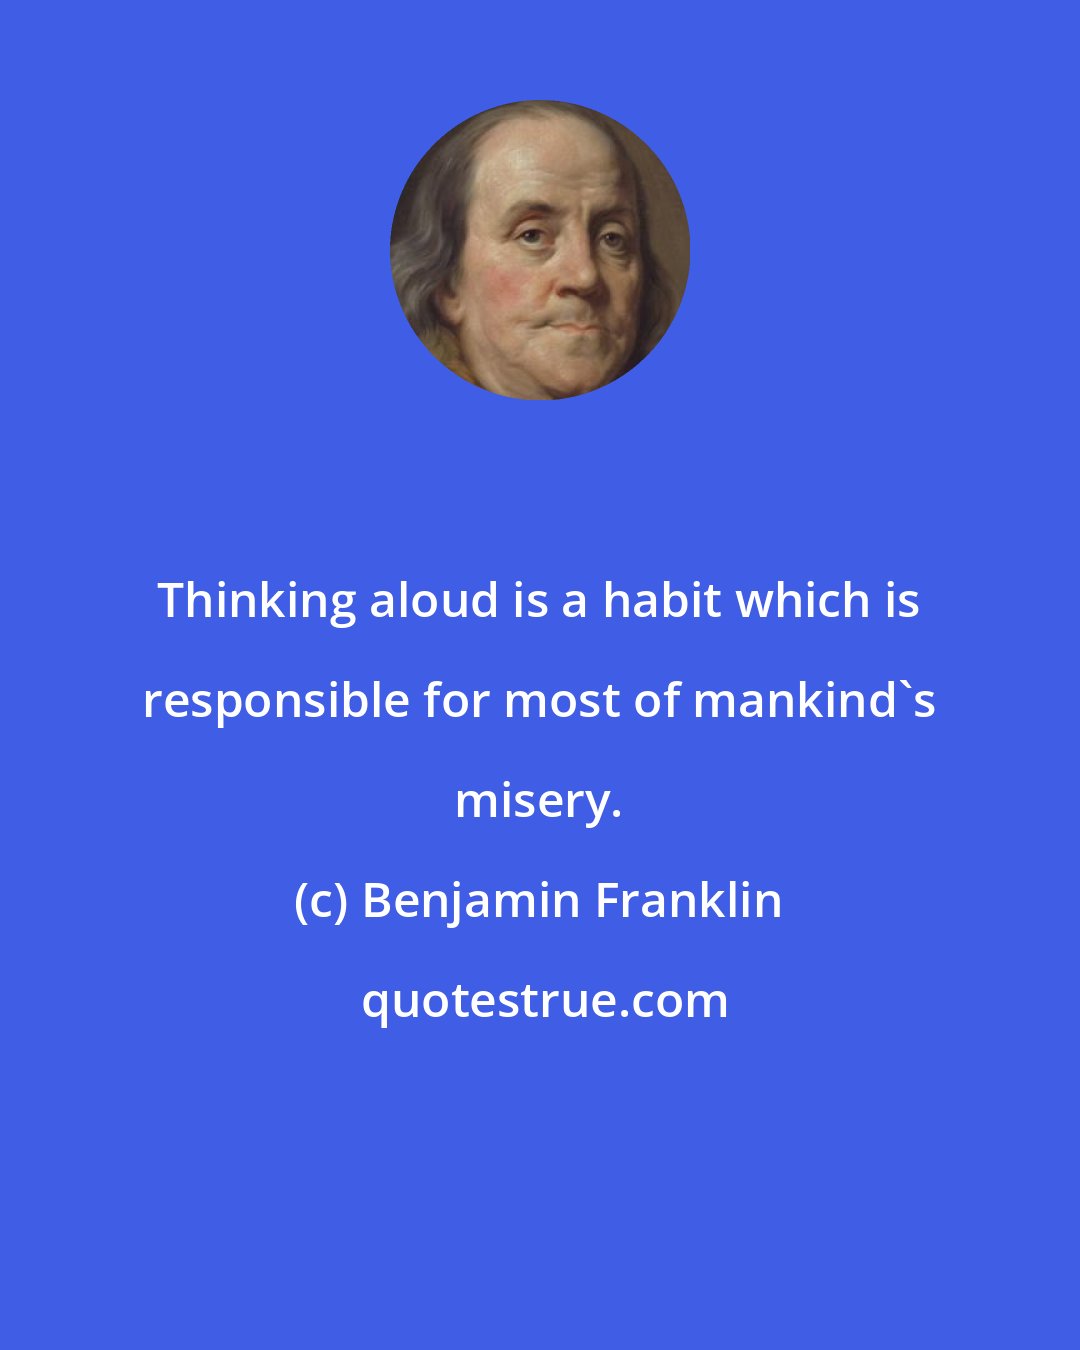 Benjamin Franklin: Thinking aloud is a habit which is responsible for most of mankind's misery.